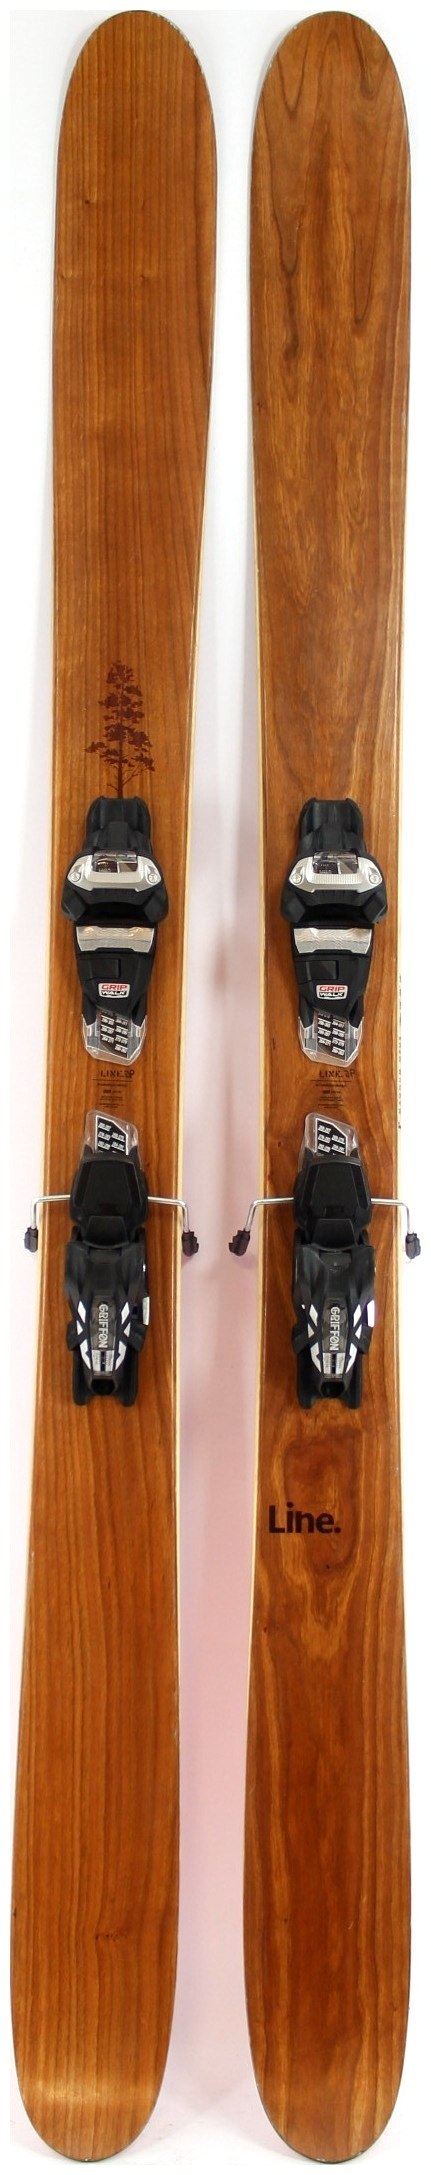 2019, Line, Magnum Opus Skis with Marker Griffon 13 Demo Bindings Used Demo  Skis 188cm